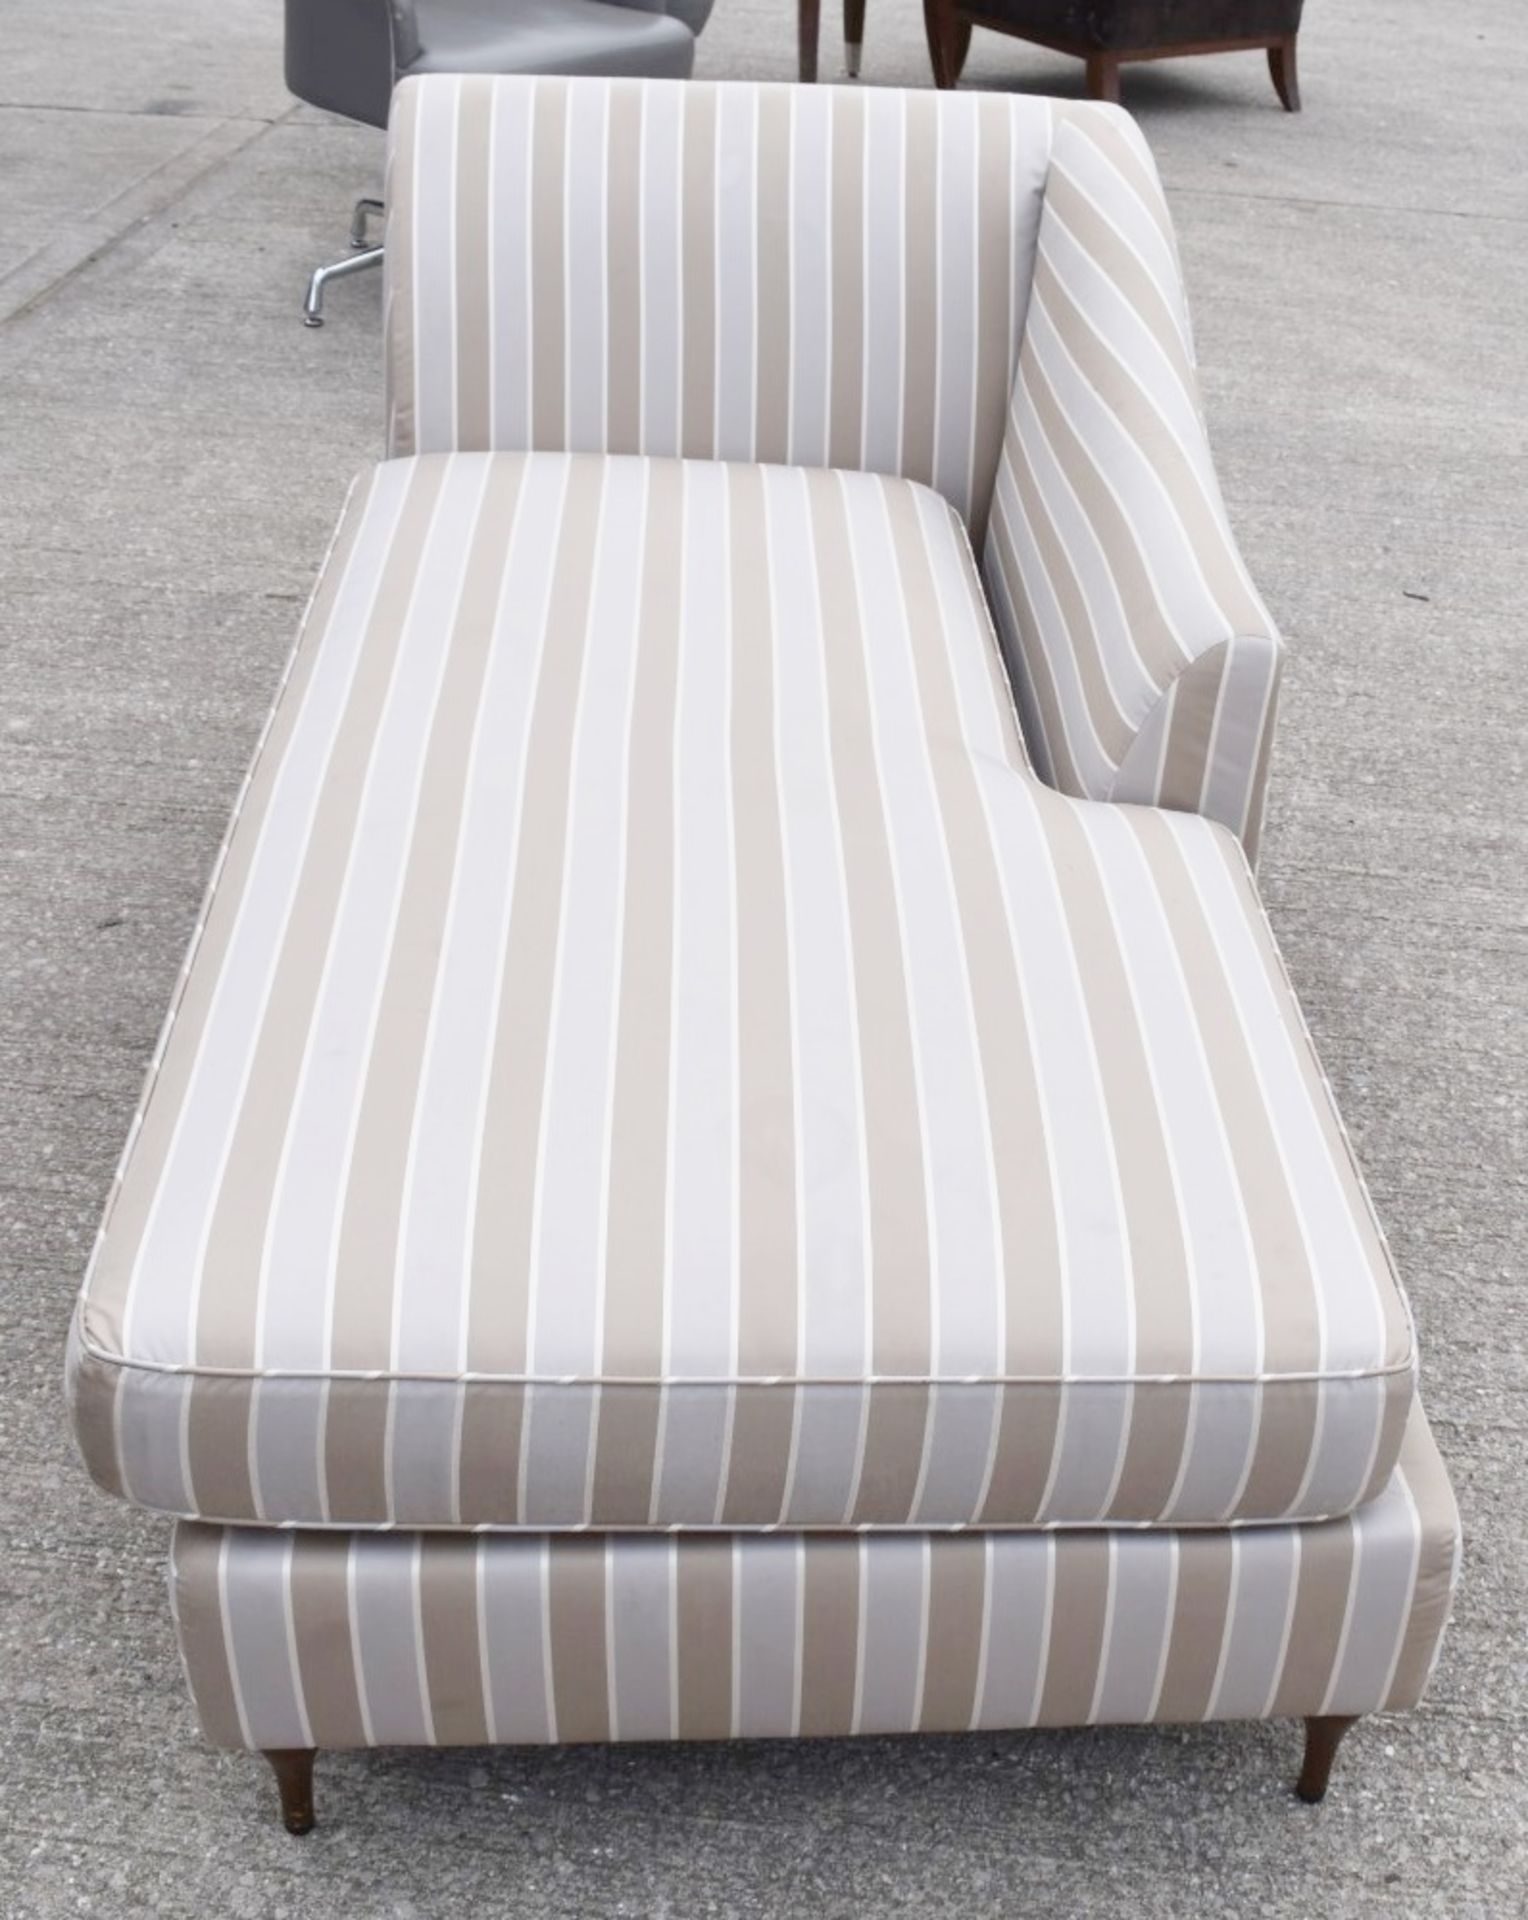 1 x Classically Styled Chaise Lounge Upholstered in a Premium Striped Fabric - Recently Procured - Image 2 of 4